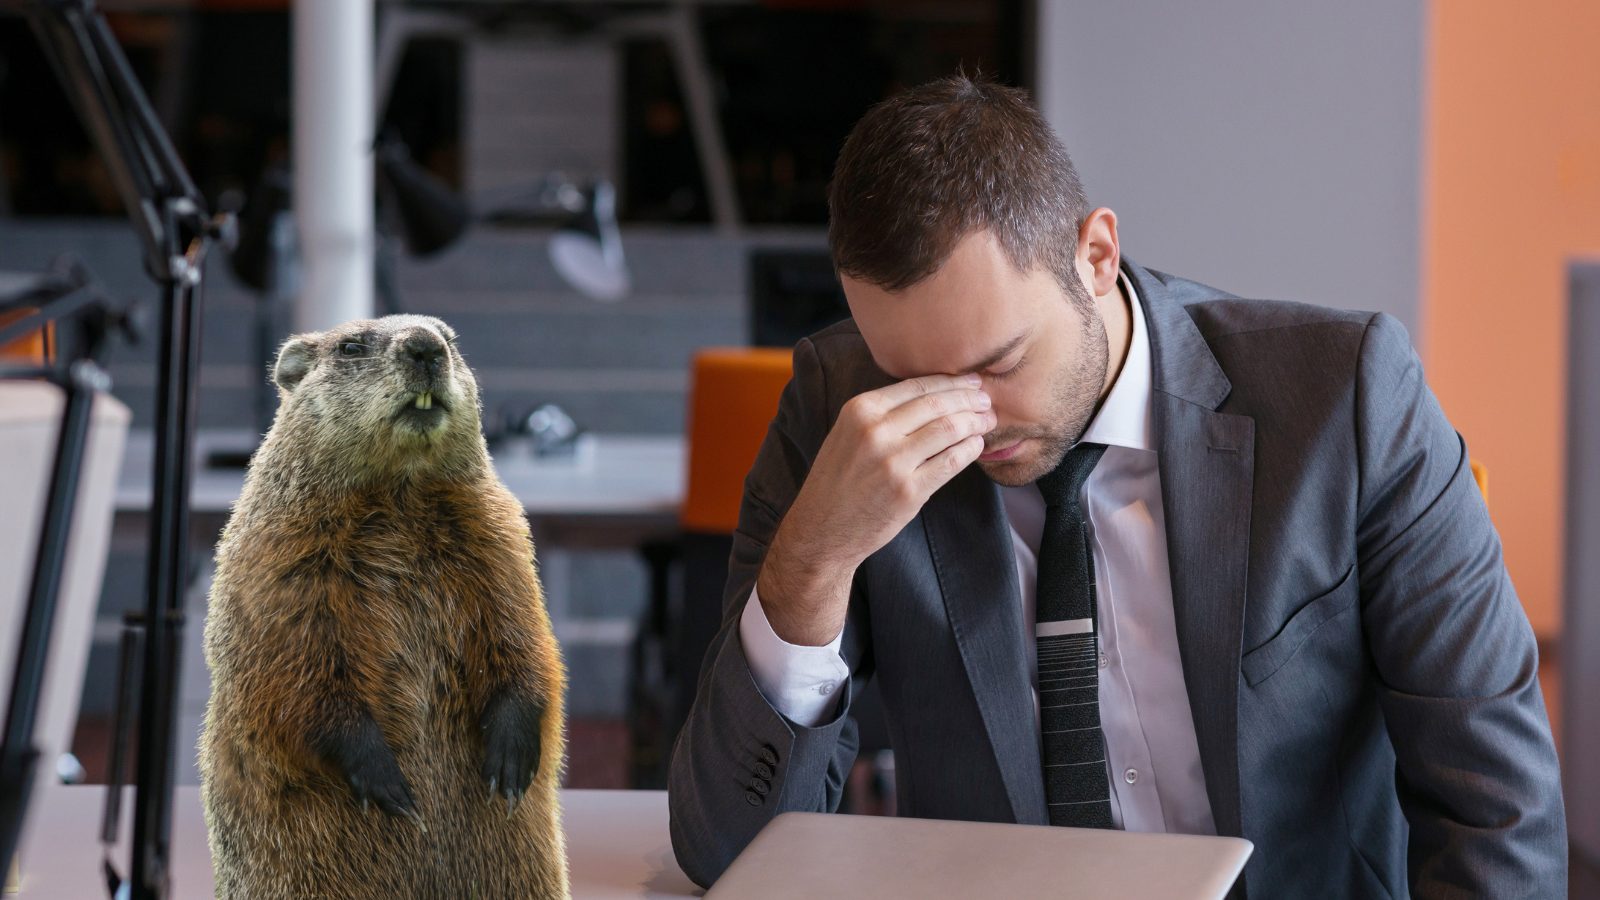 Do You Suffer from Groundhog Day Syndrome?